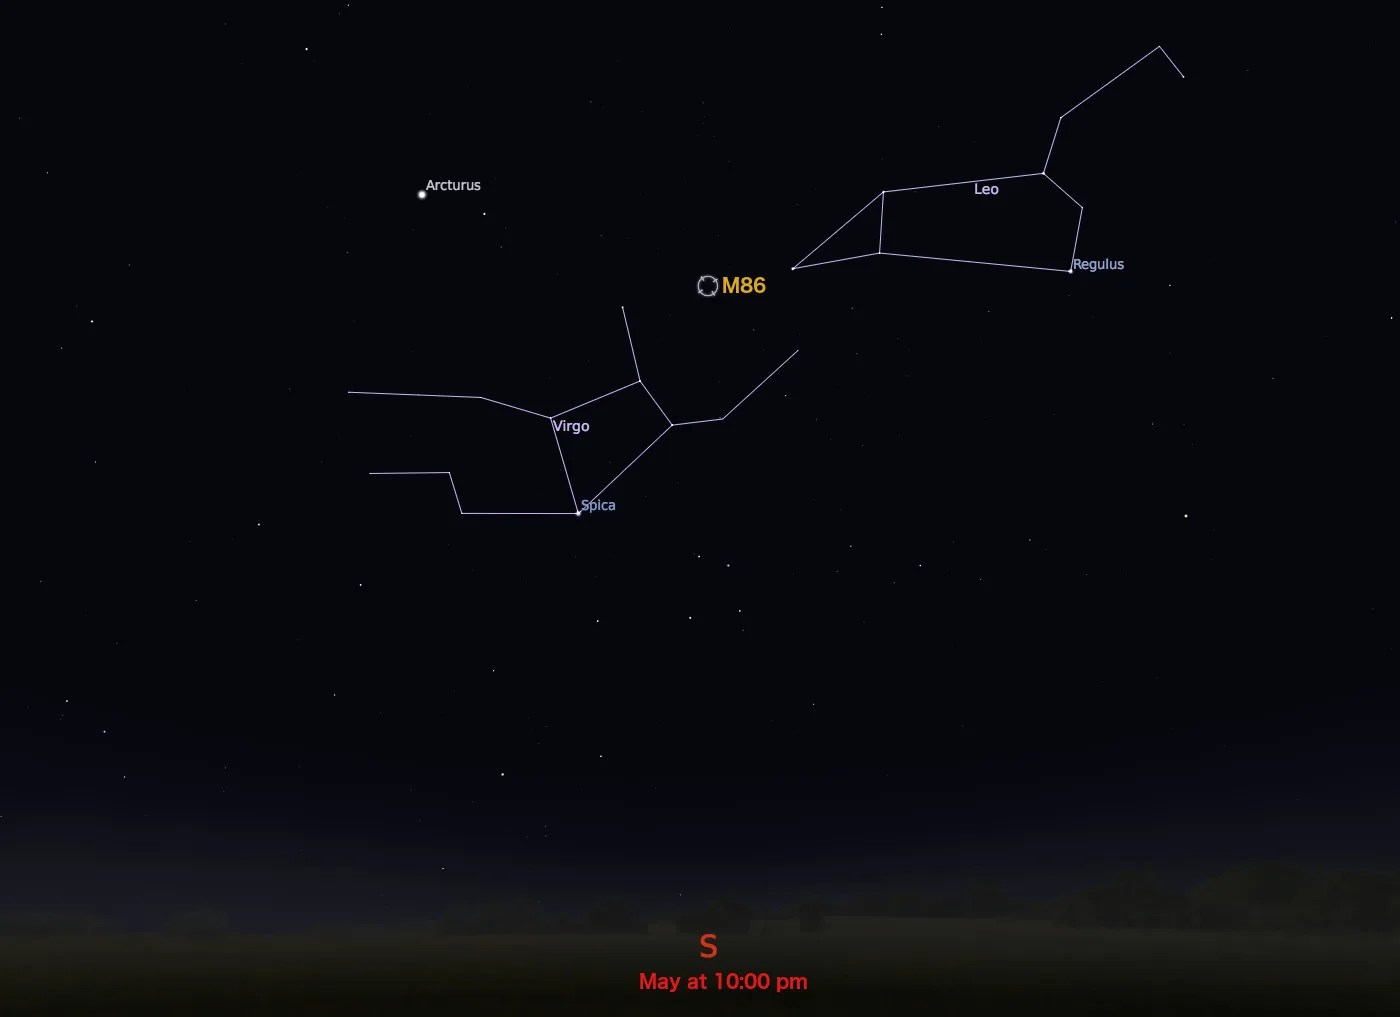 star chart showing location in night sky of M86